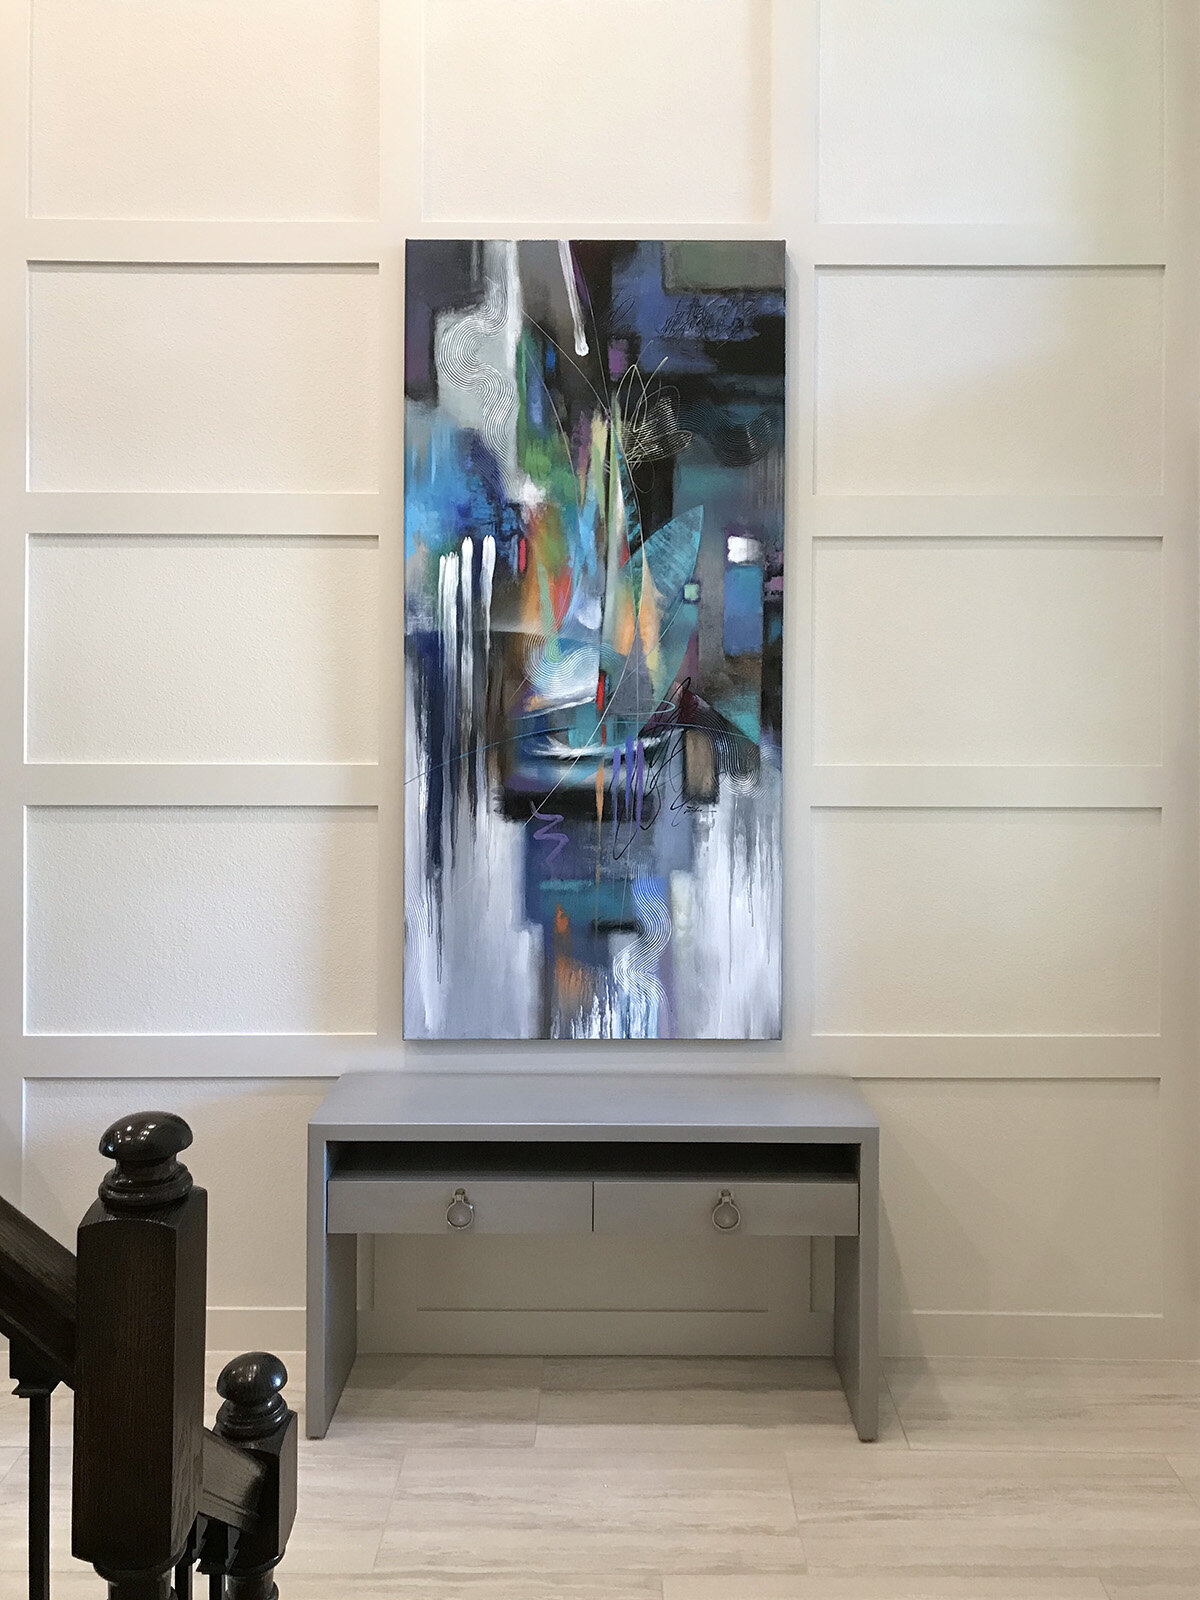 Large abstract artwork naples fl, large abstract paintings, Large abstract prints southwest fl, artist Tim Parker Art Naples FL 316.JPG